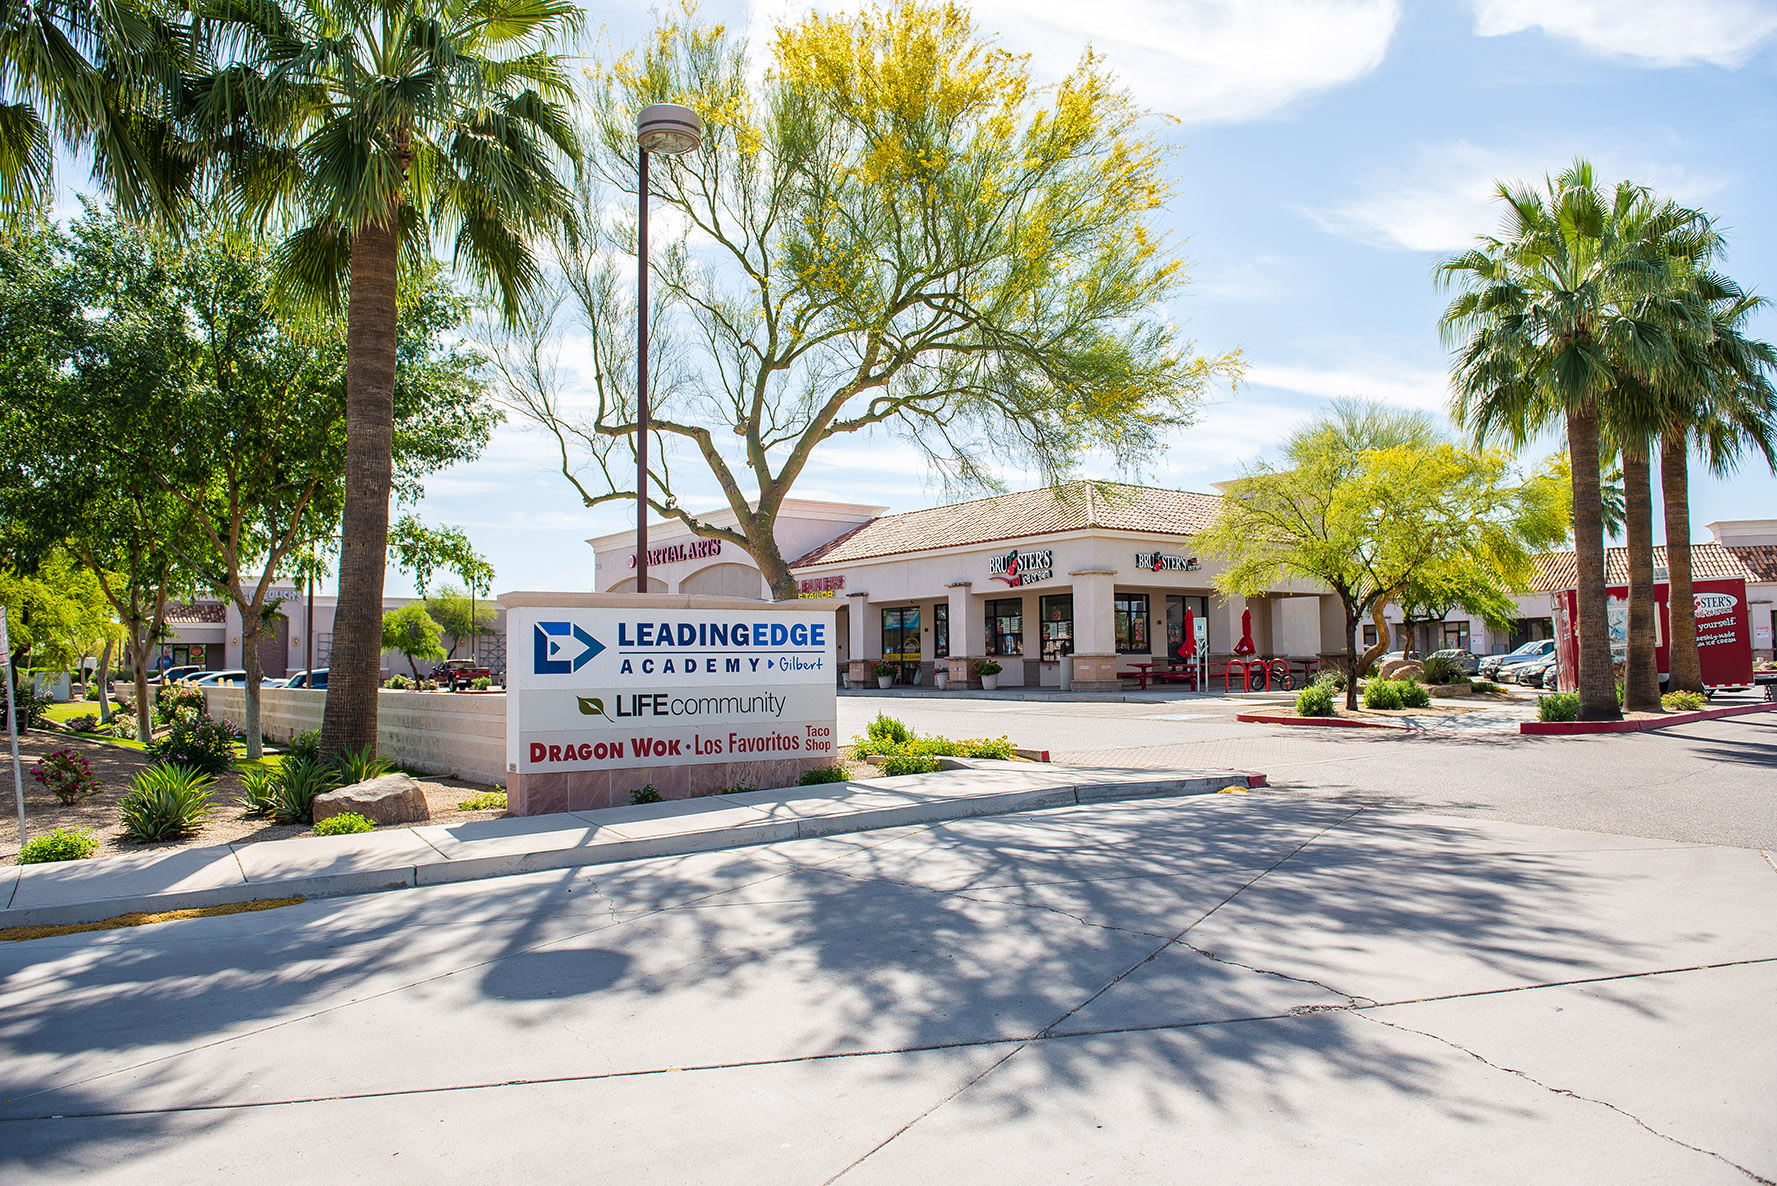 Velocity Retail Group’s Investment Division Completes Multi-Million Dollar Investment Sale of Cooper Square in Gilbert, Arizona 2